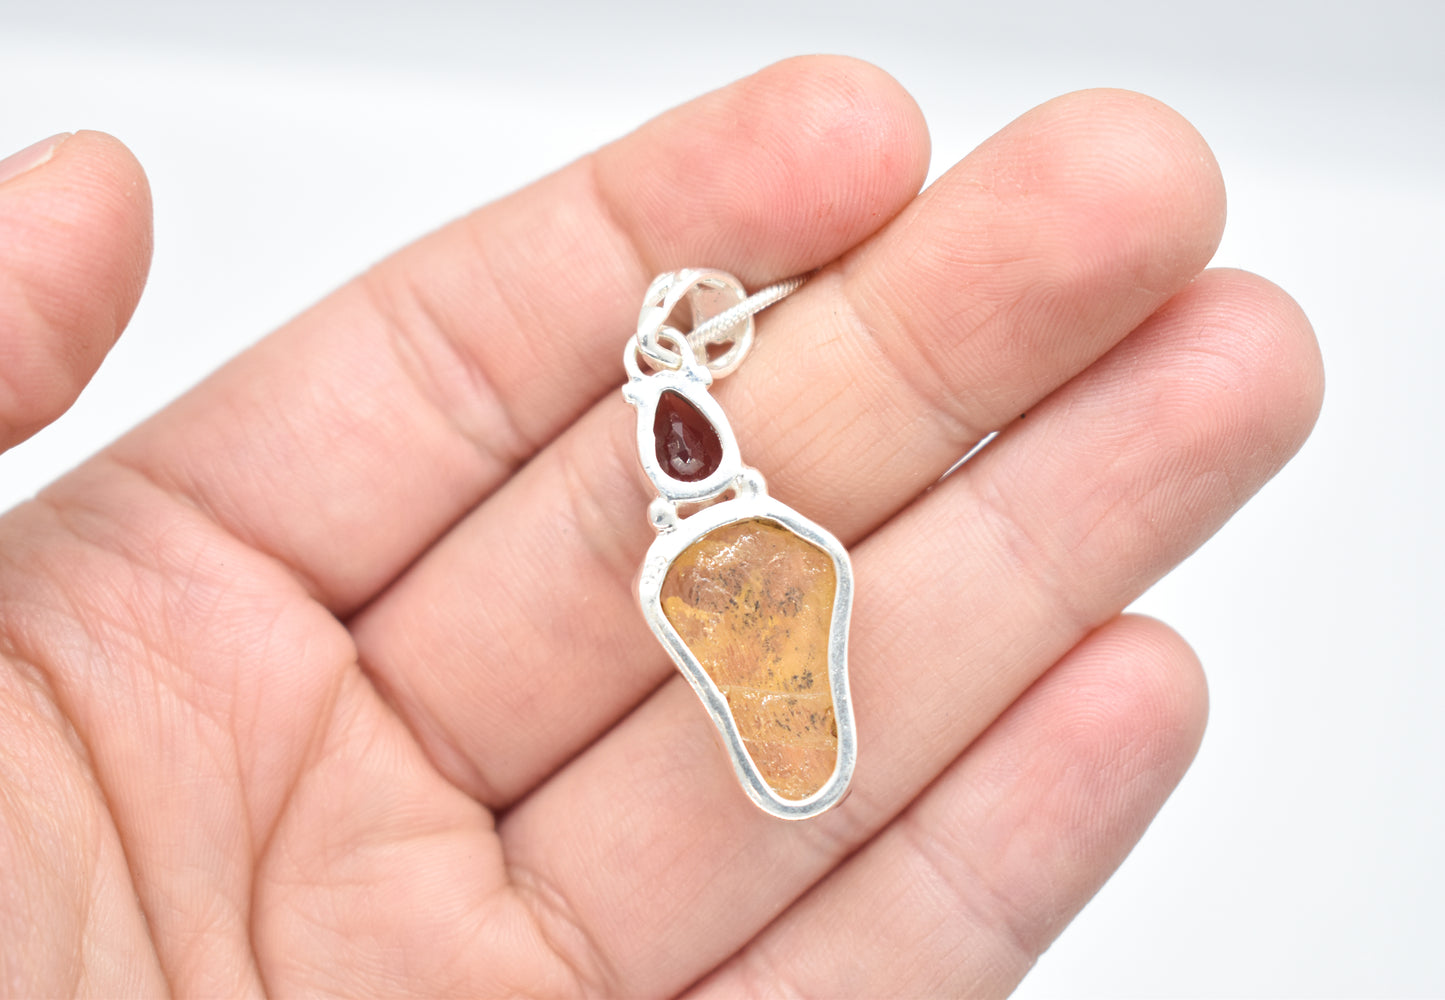 Citrine and Garnet Sterling Silver Necklace